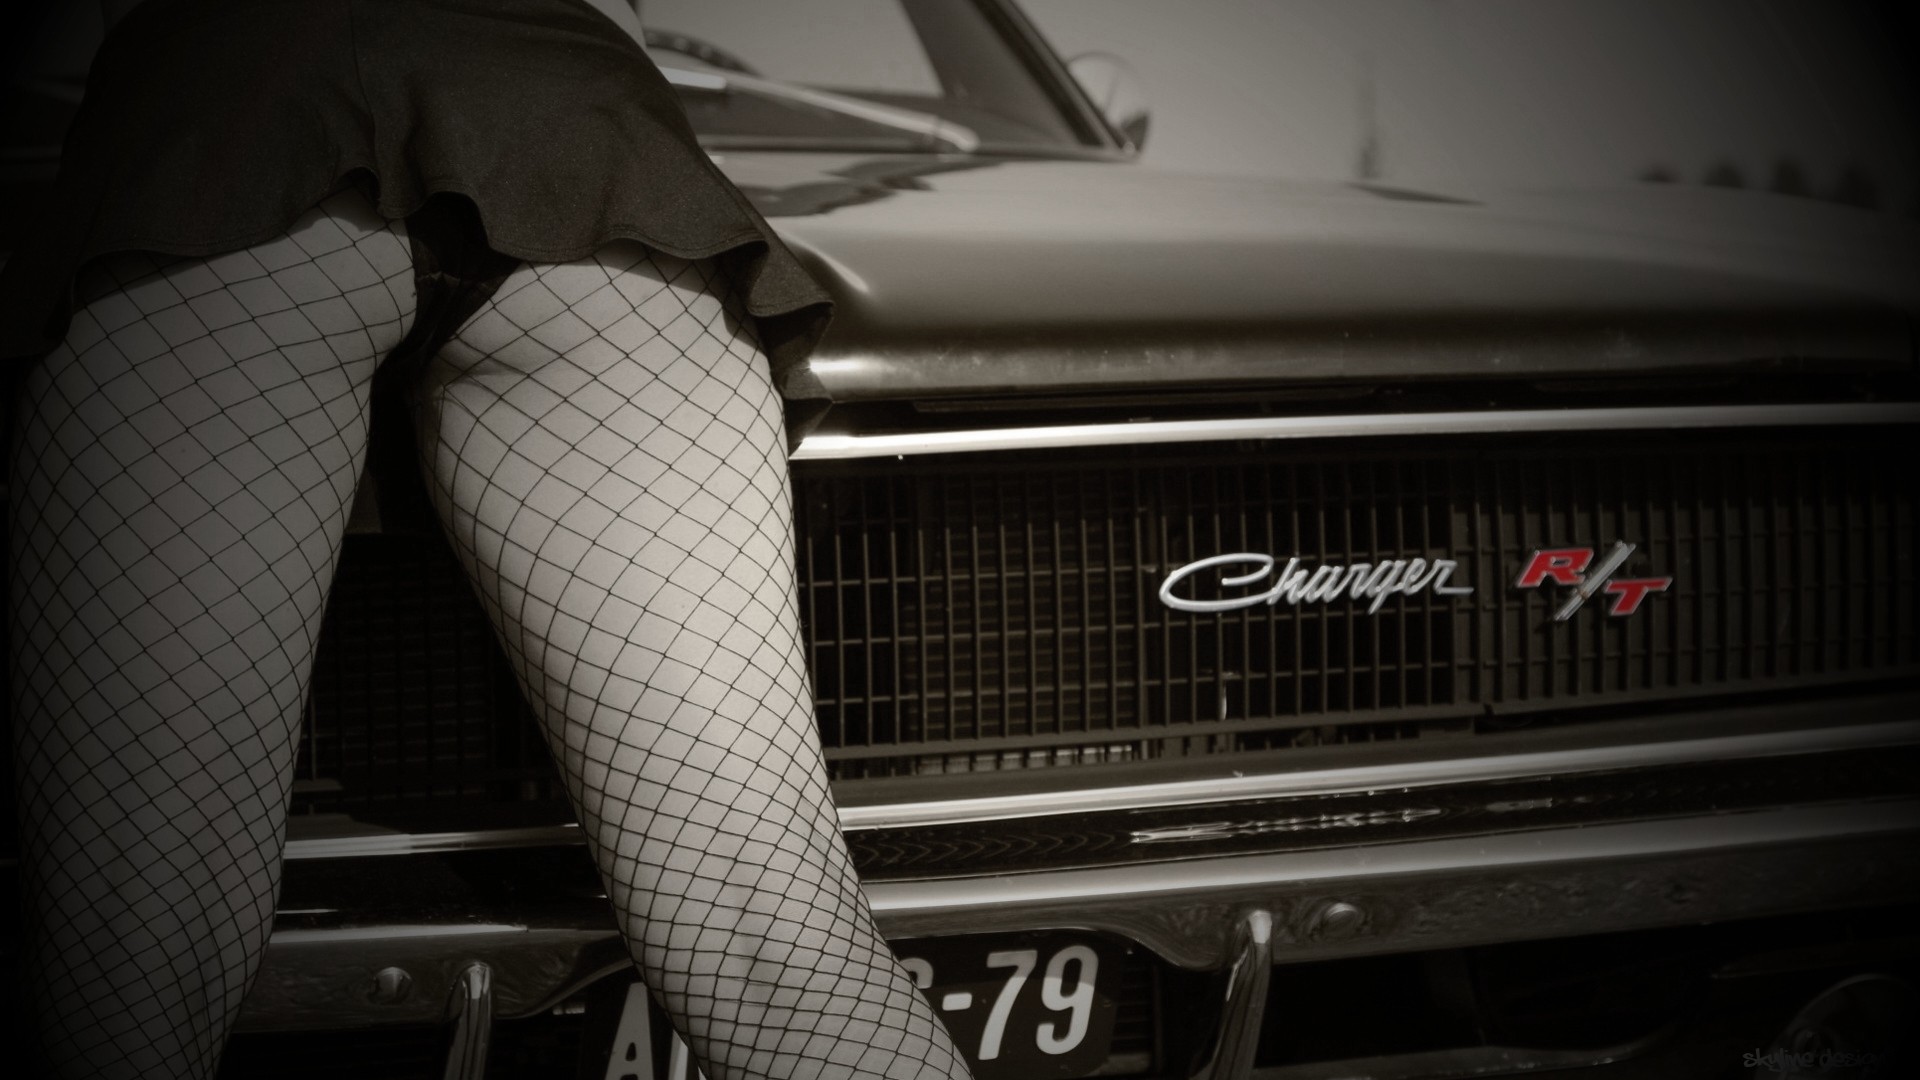 People 1920x1080 Dodge Charger legs ass women with cars pantyhose women vehicle Dodge numbers car model selective coloring fishnet pantyhose rear view